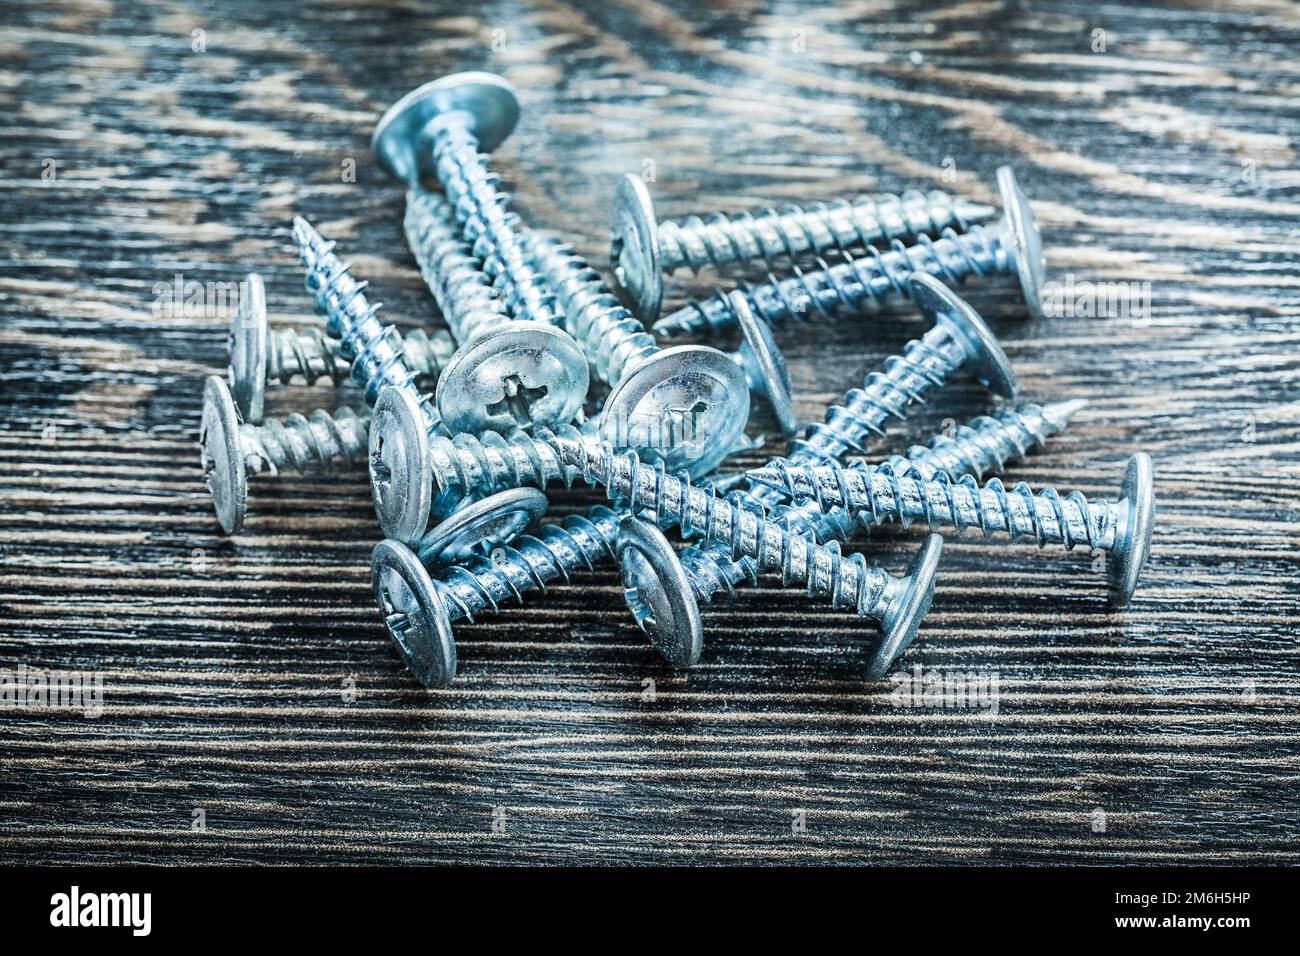 Heap of stainless screws on wooden board. Stock Photo